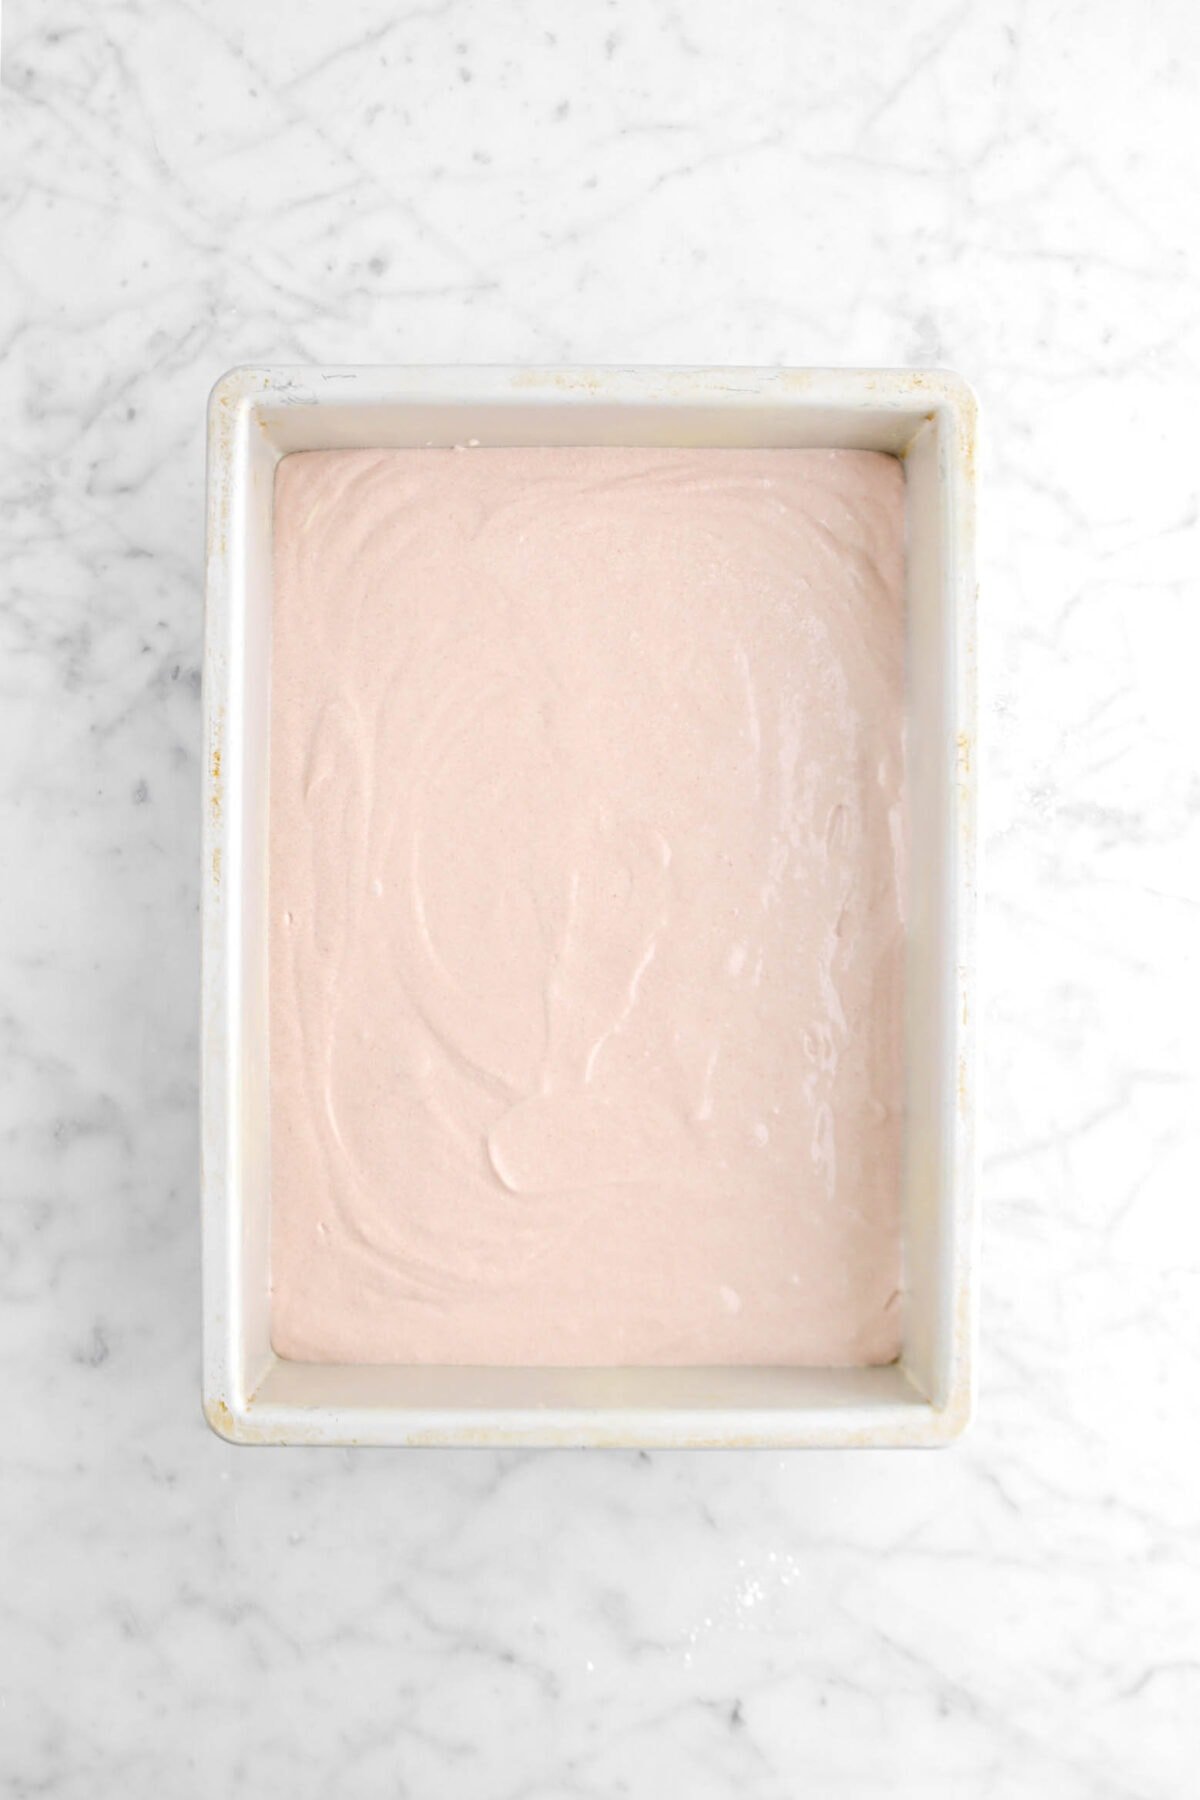 strawberry cake batter in sheet pan on marble surface